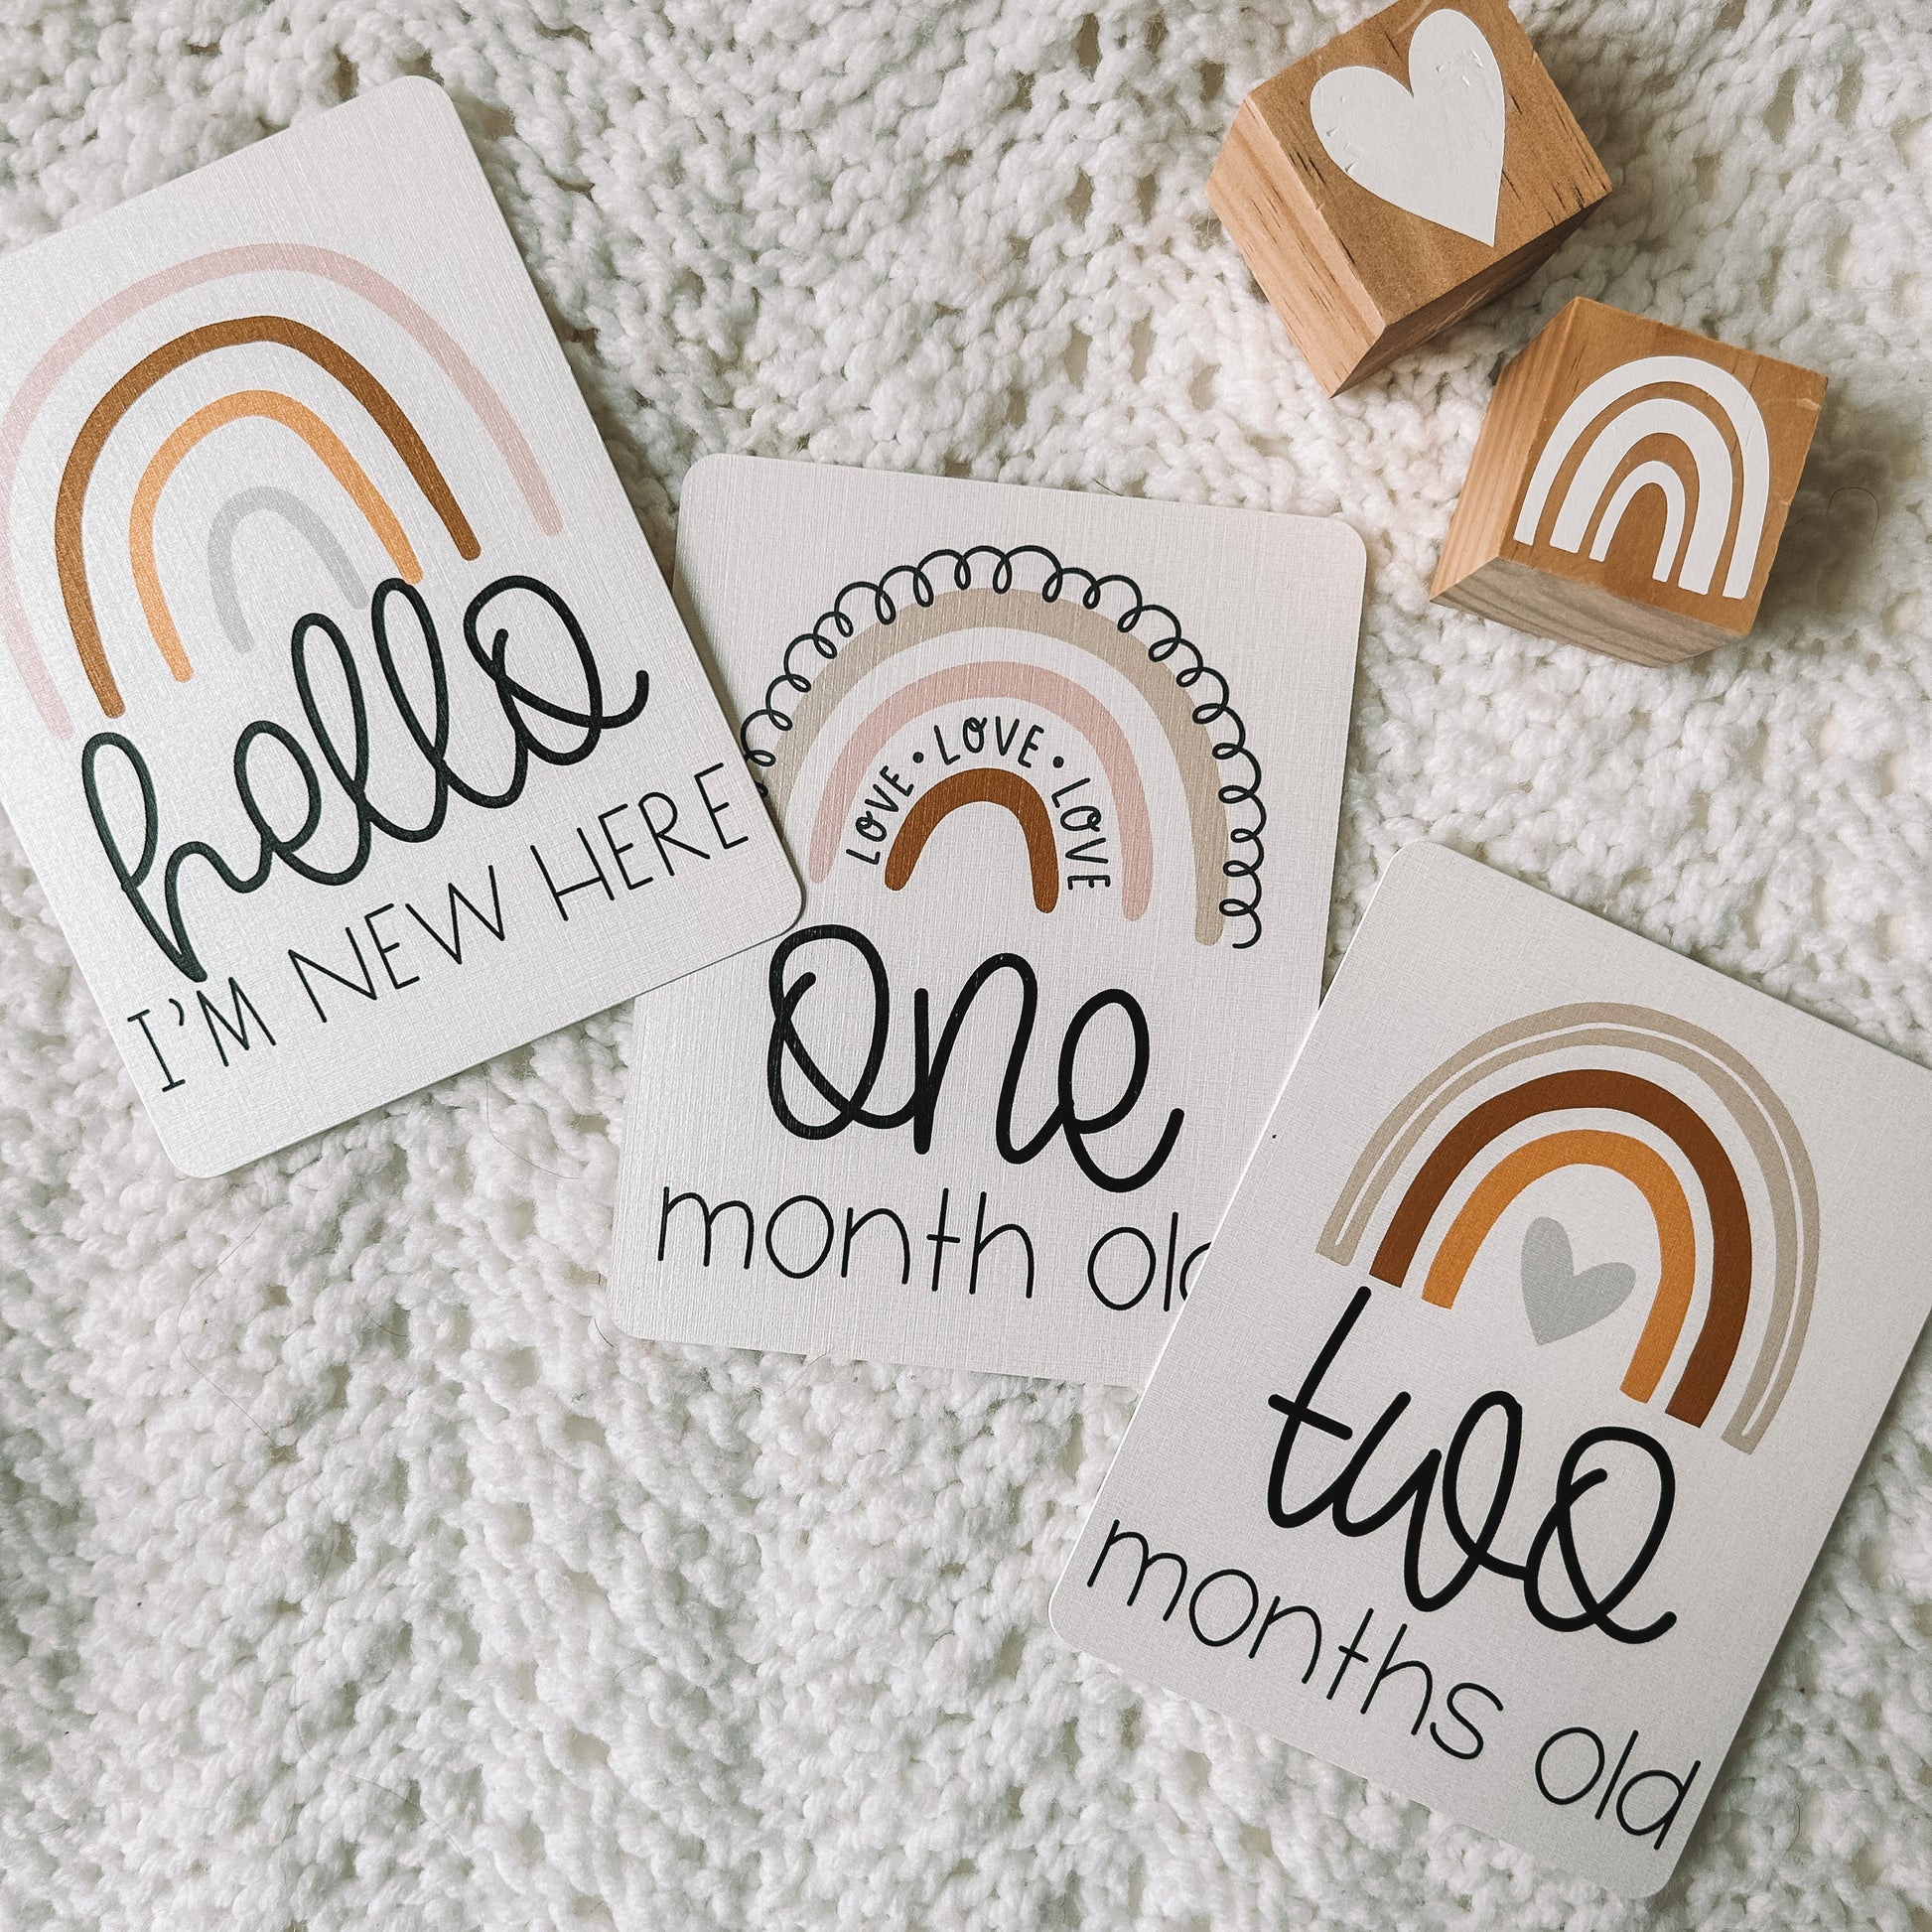 hello I'm new here, one month old, and two months old milestone cards with a rainbow above the text